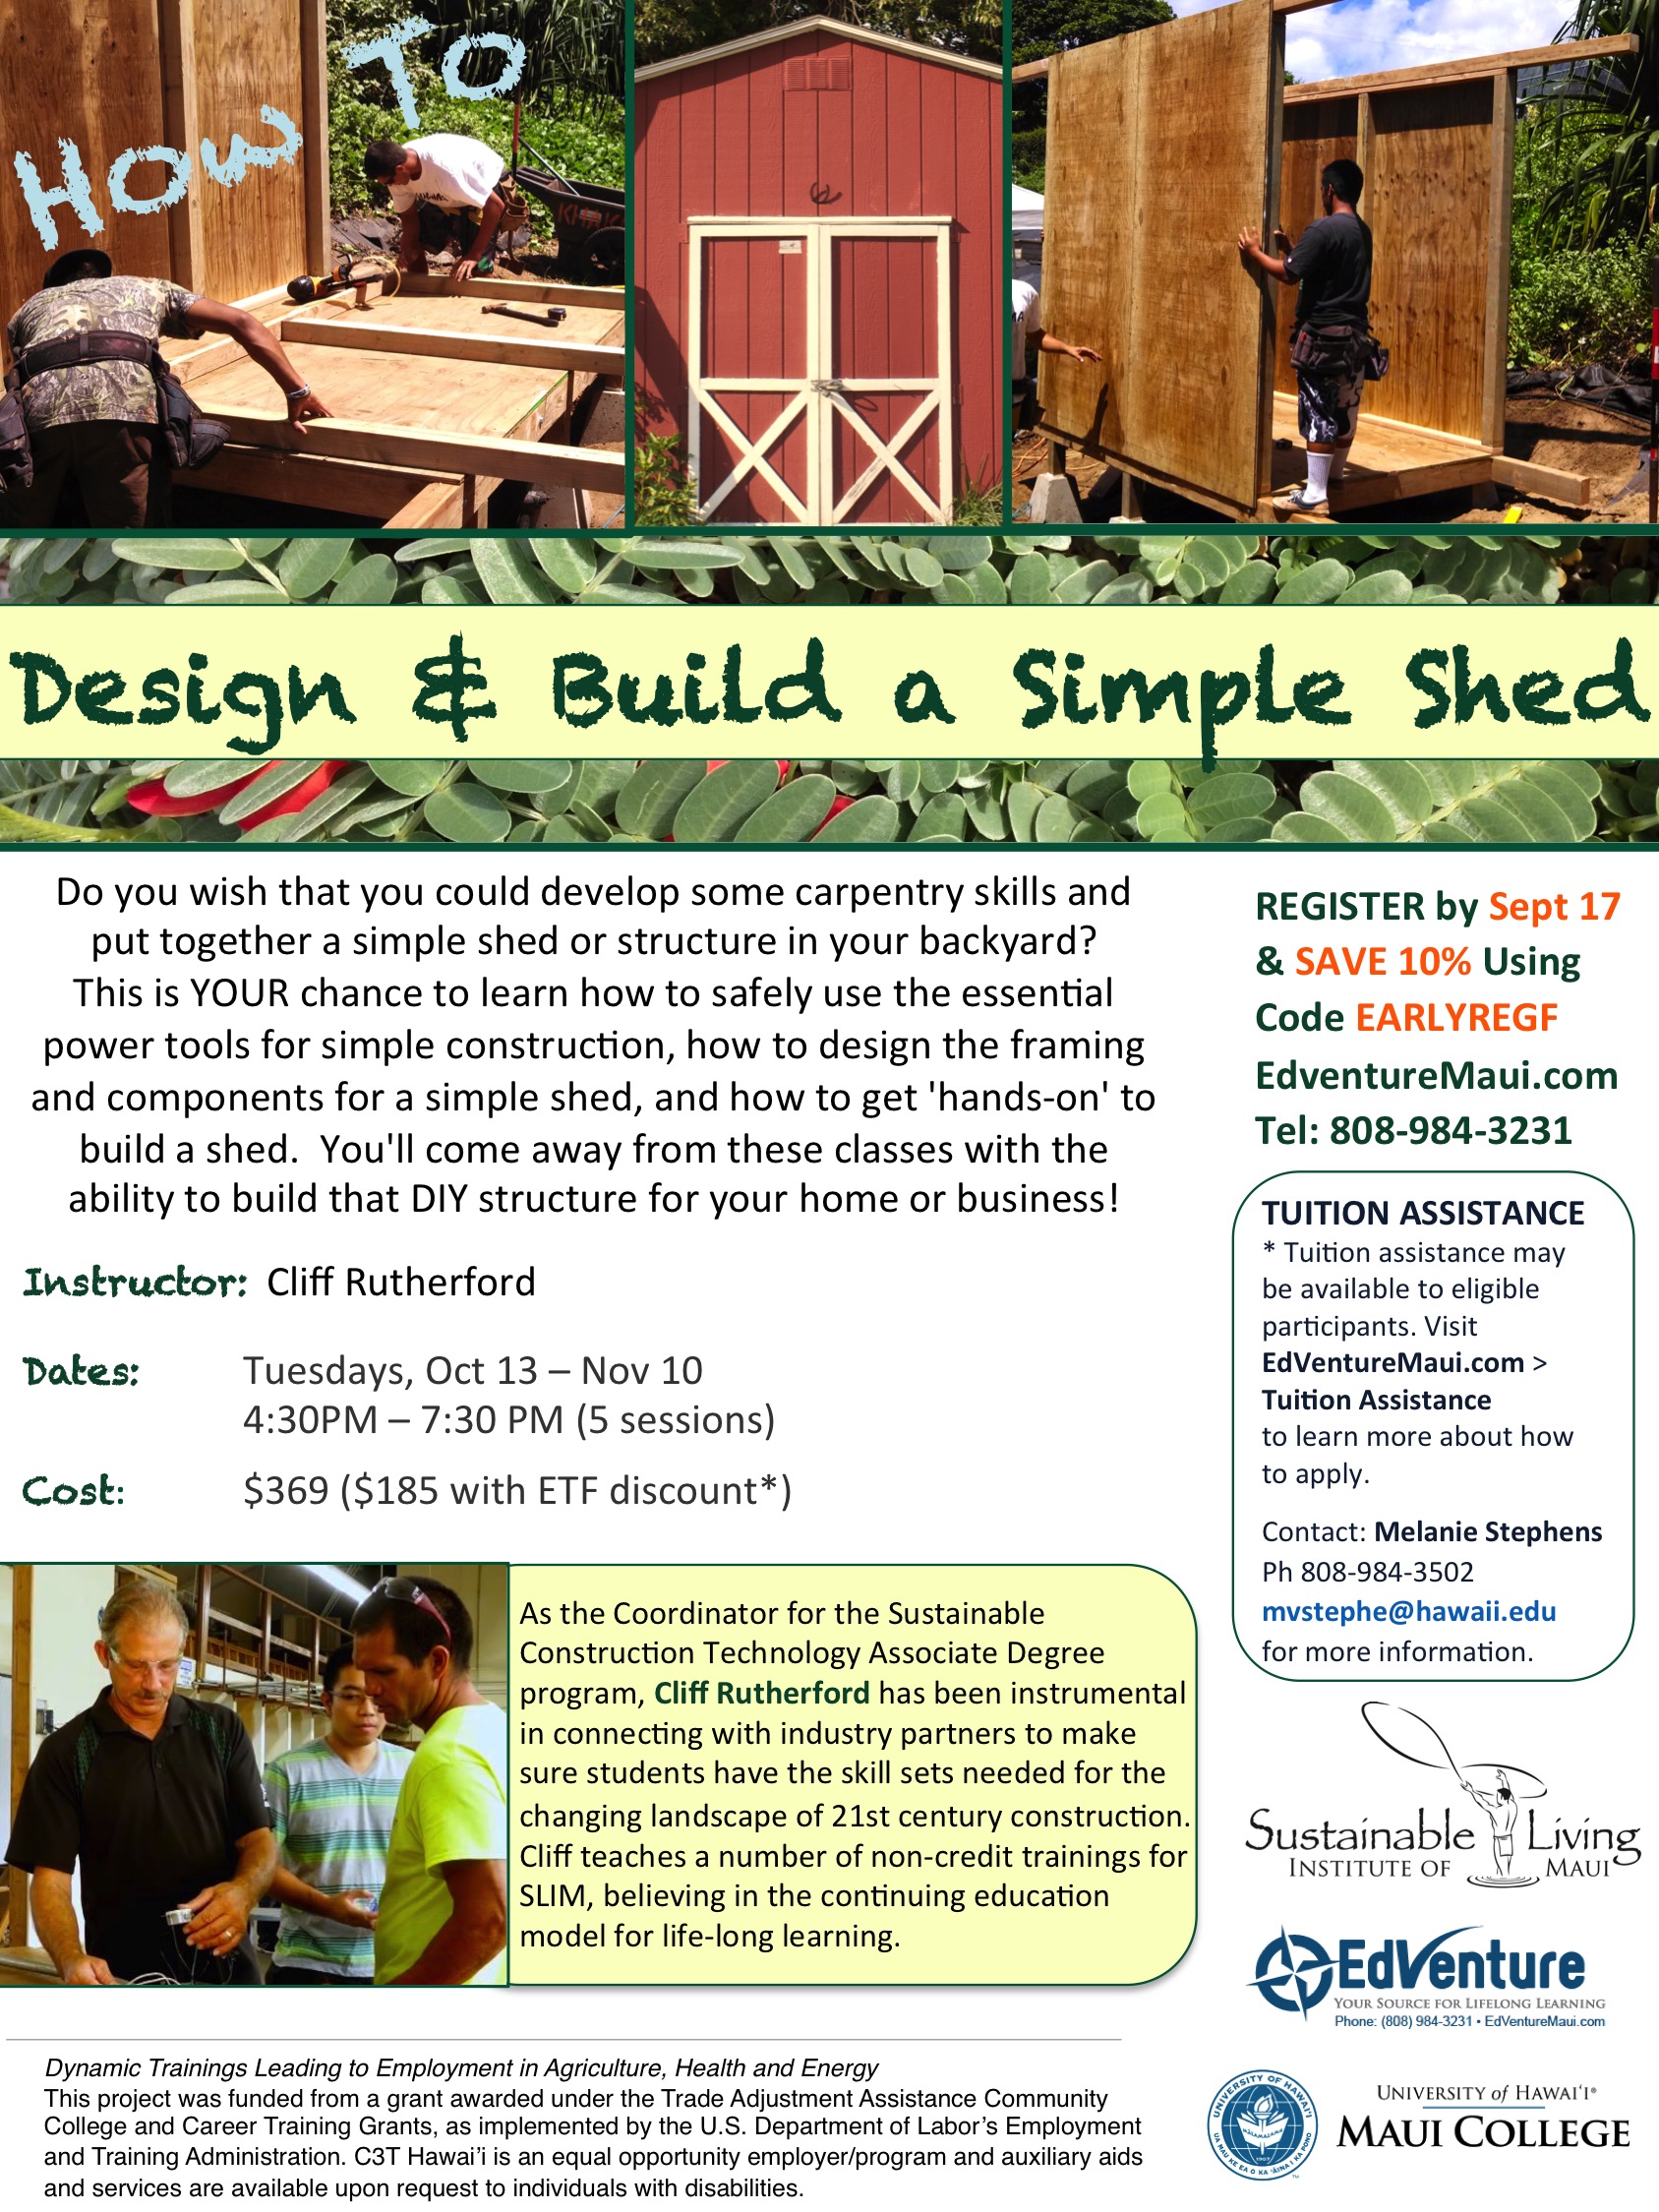 How To Design and Build a Simple Shed_FALL 2015